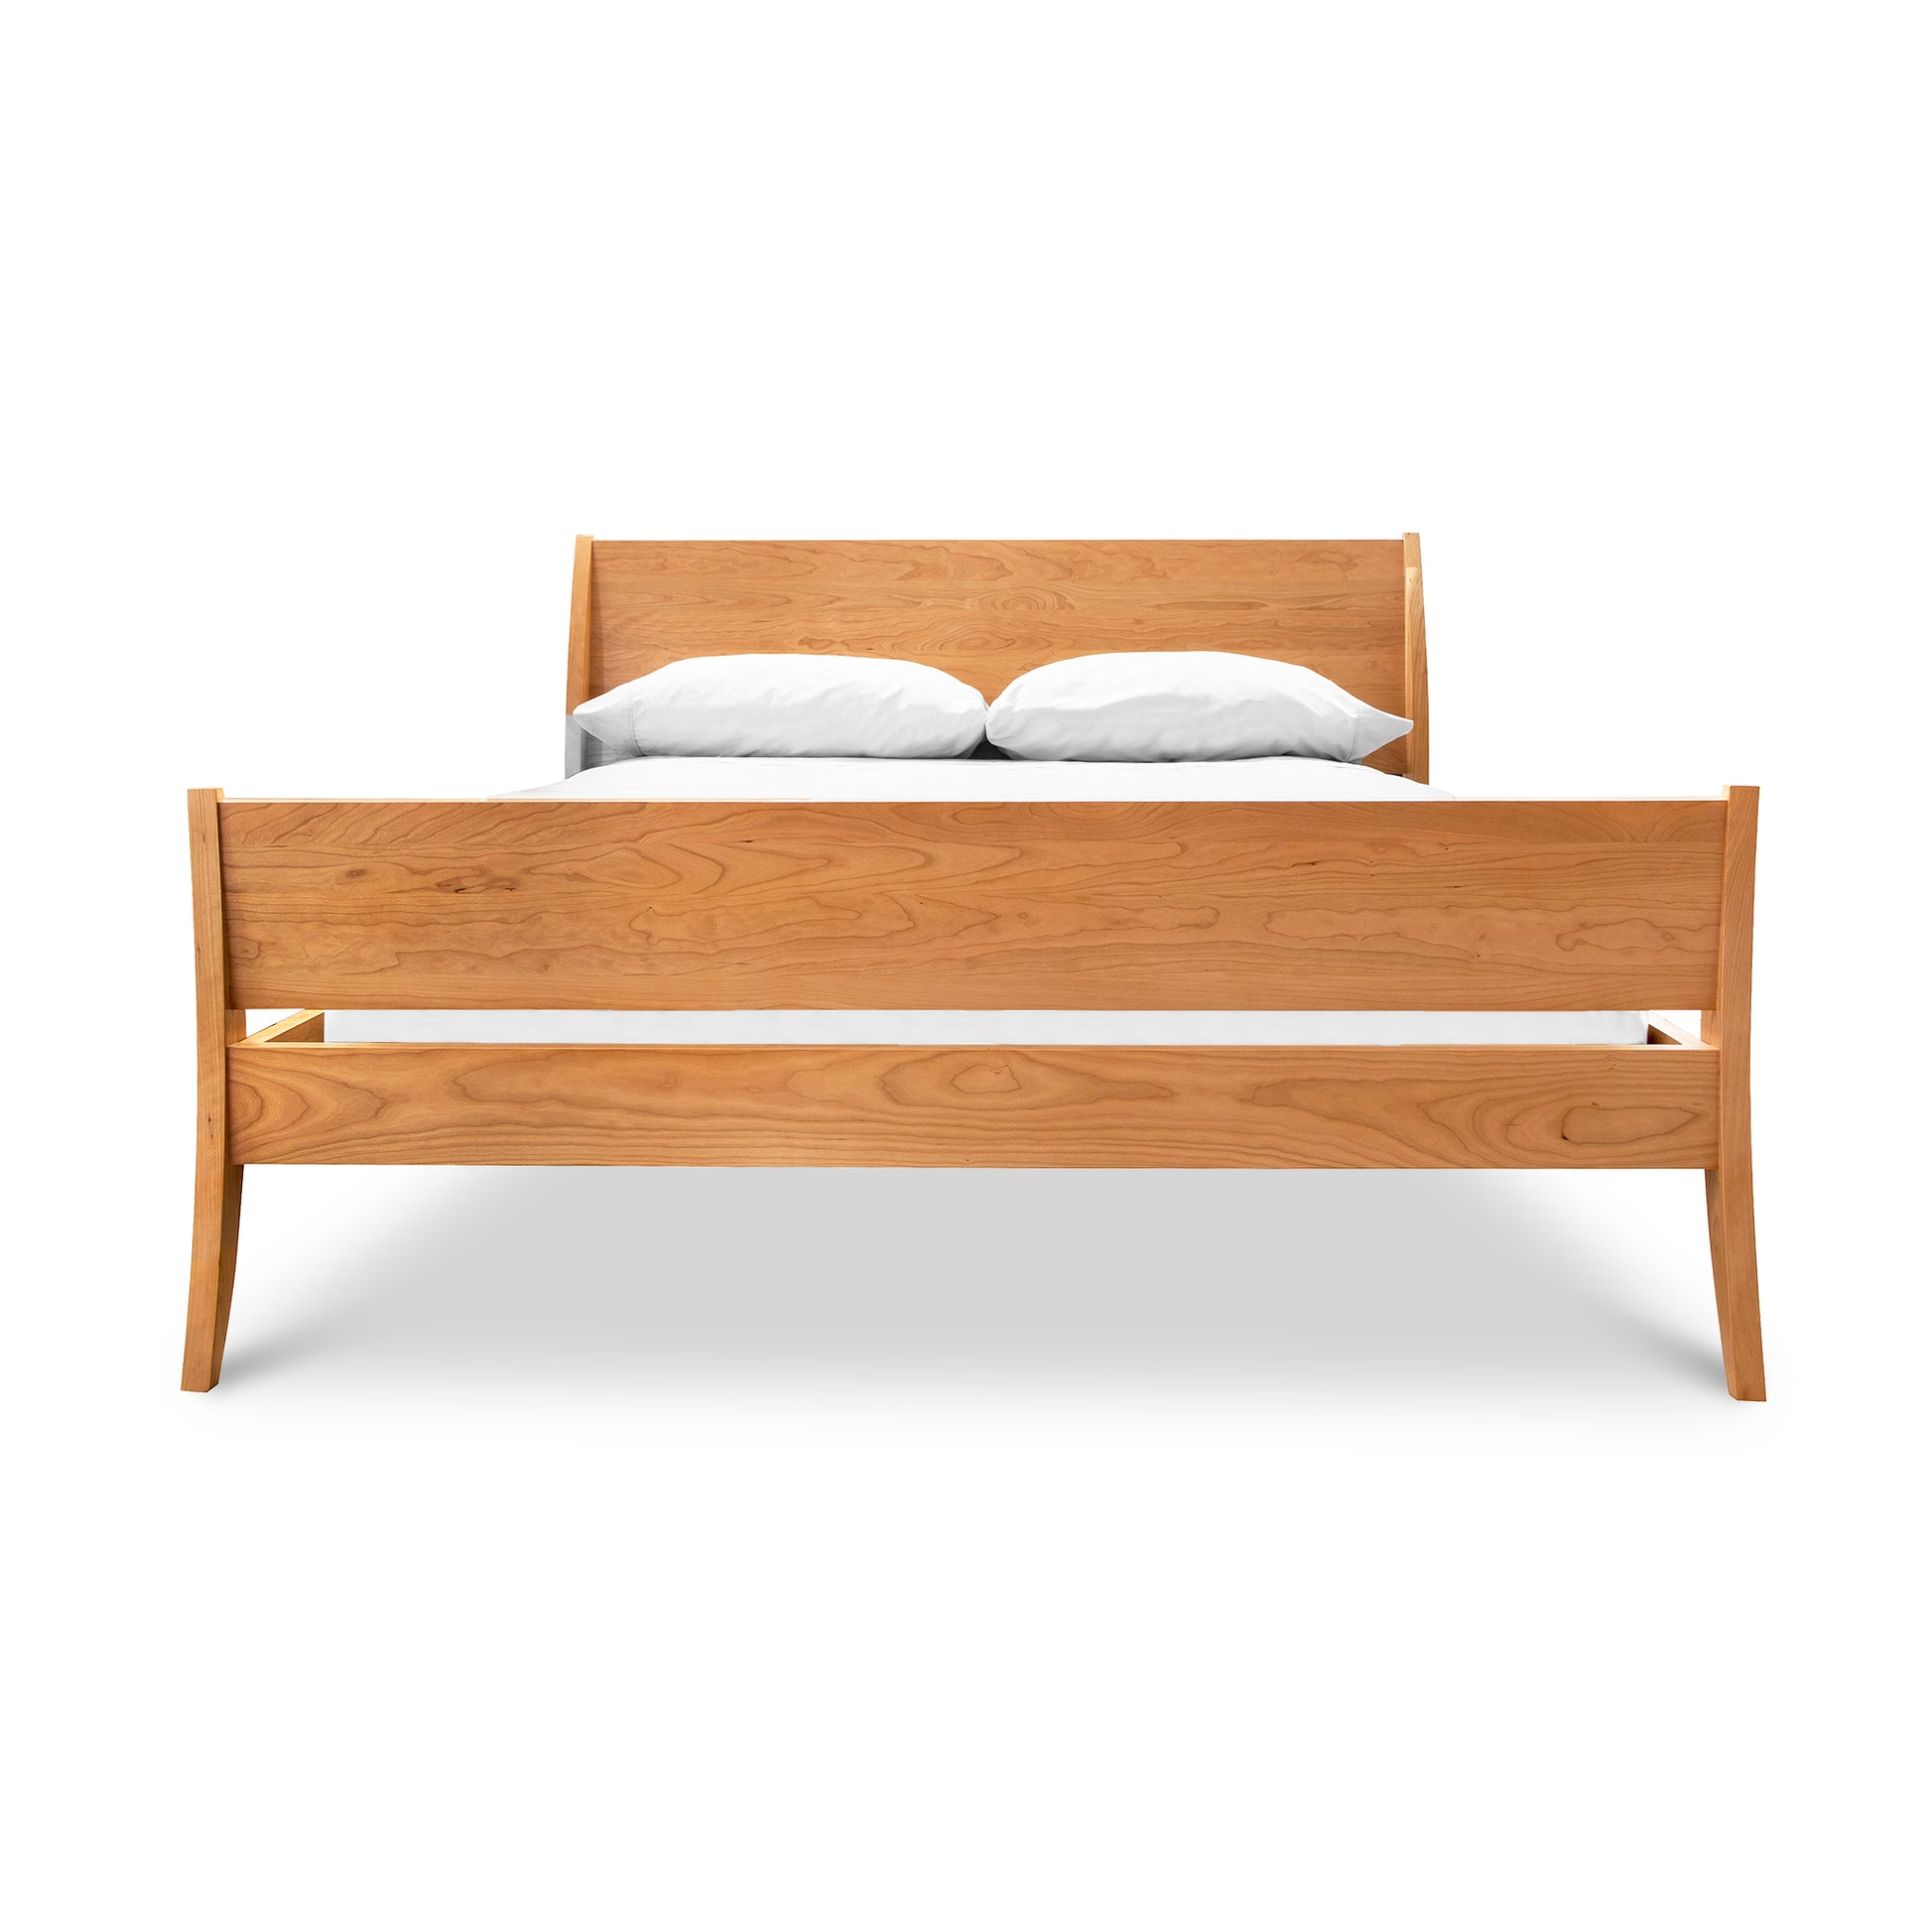 The Lyndon Furniture Holland Sleigh Bed offers a contemporary twist on a classic design, featuring solid wood options and pristine white sheets.